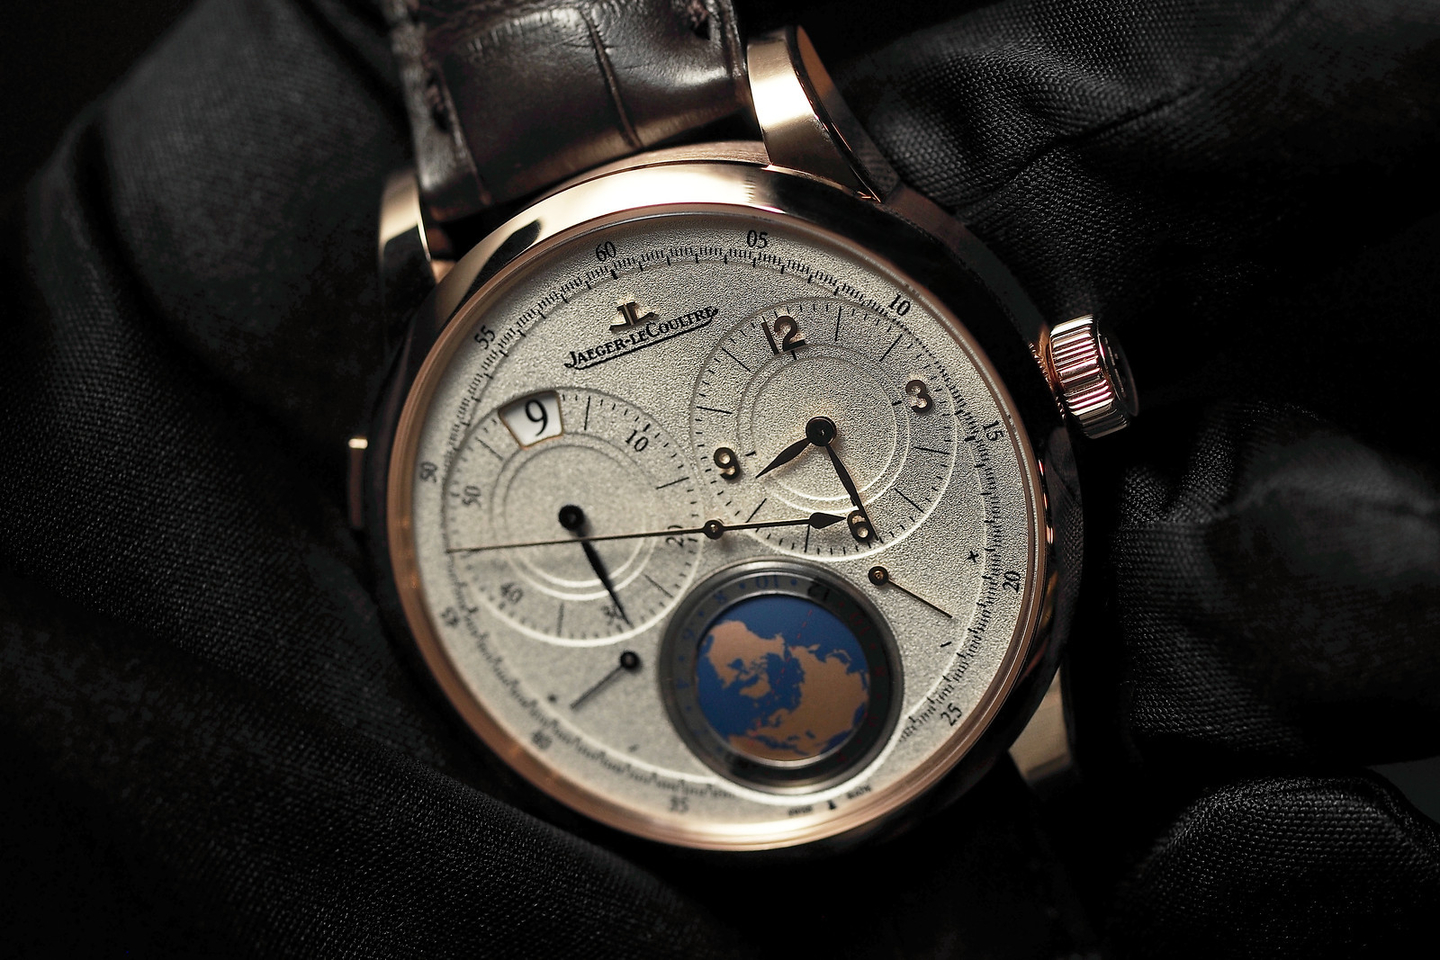 Jaeger-LeCoultre SIHH 2014 Report